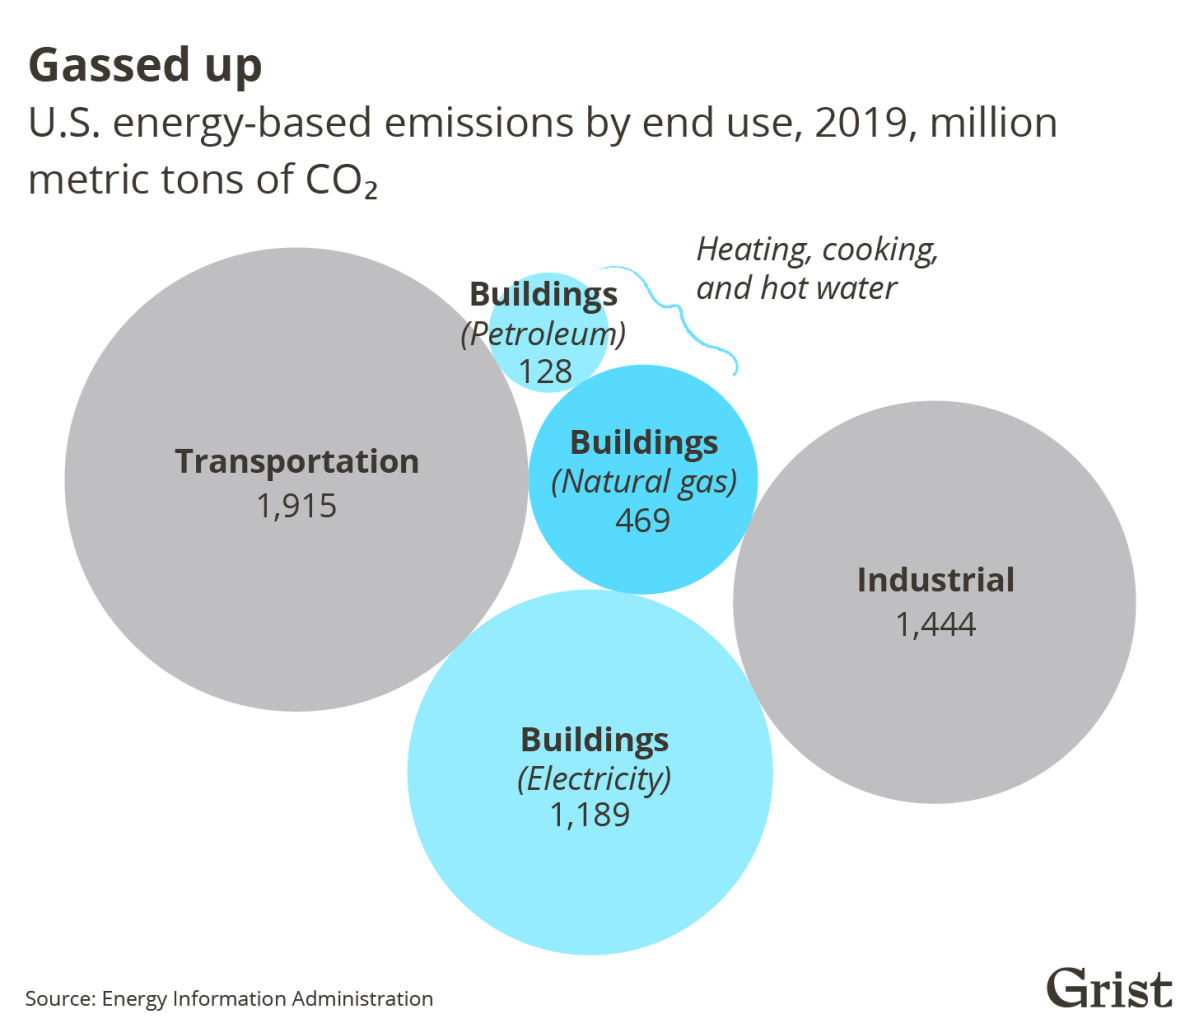 A bubble chart showing U.S. energy-based emissions by end use for 2019 in million metric tons of CO2. Burning natural gas in buildings accounted for 469 million metric tons of CO2 that year.